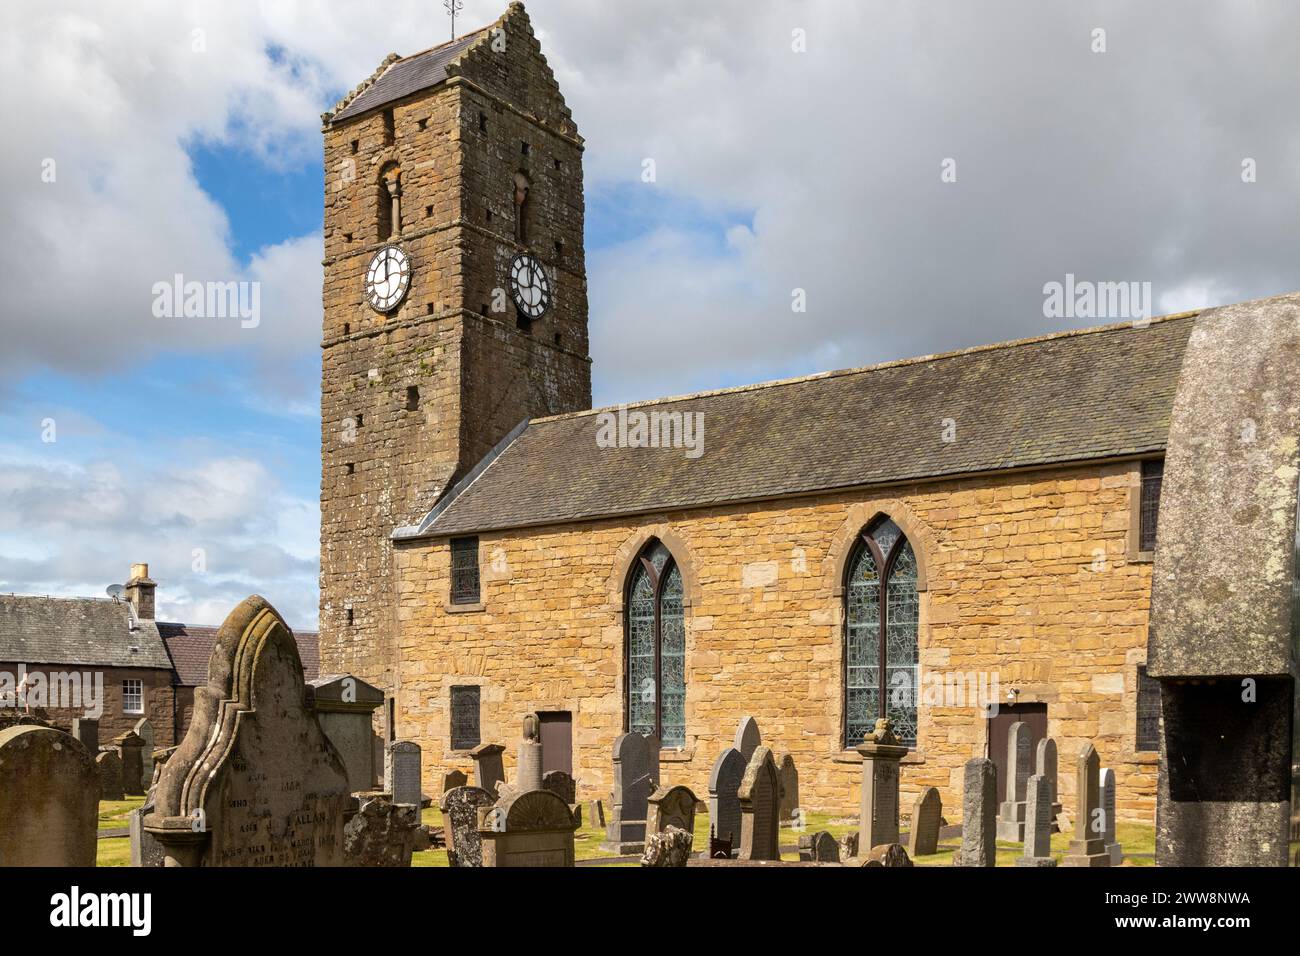 St serfs Torre dell'orologio medievale, Dunning Perthshire Foto Stock